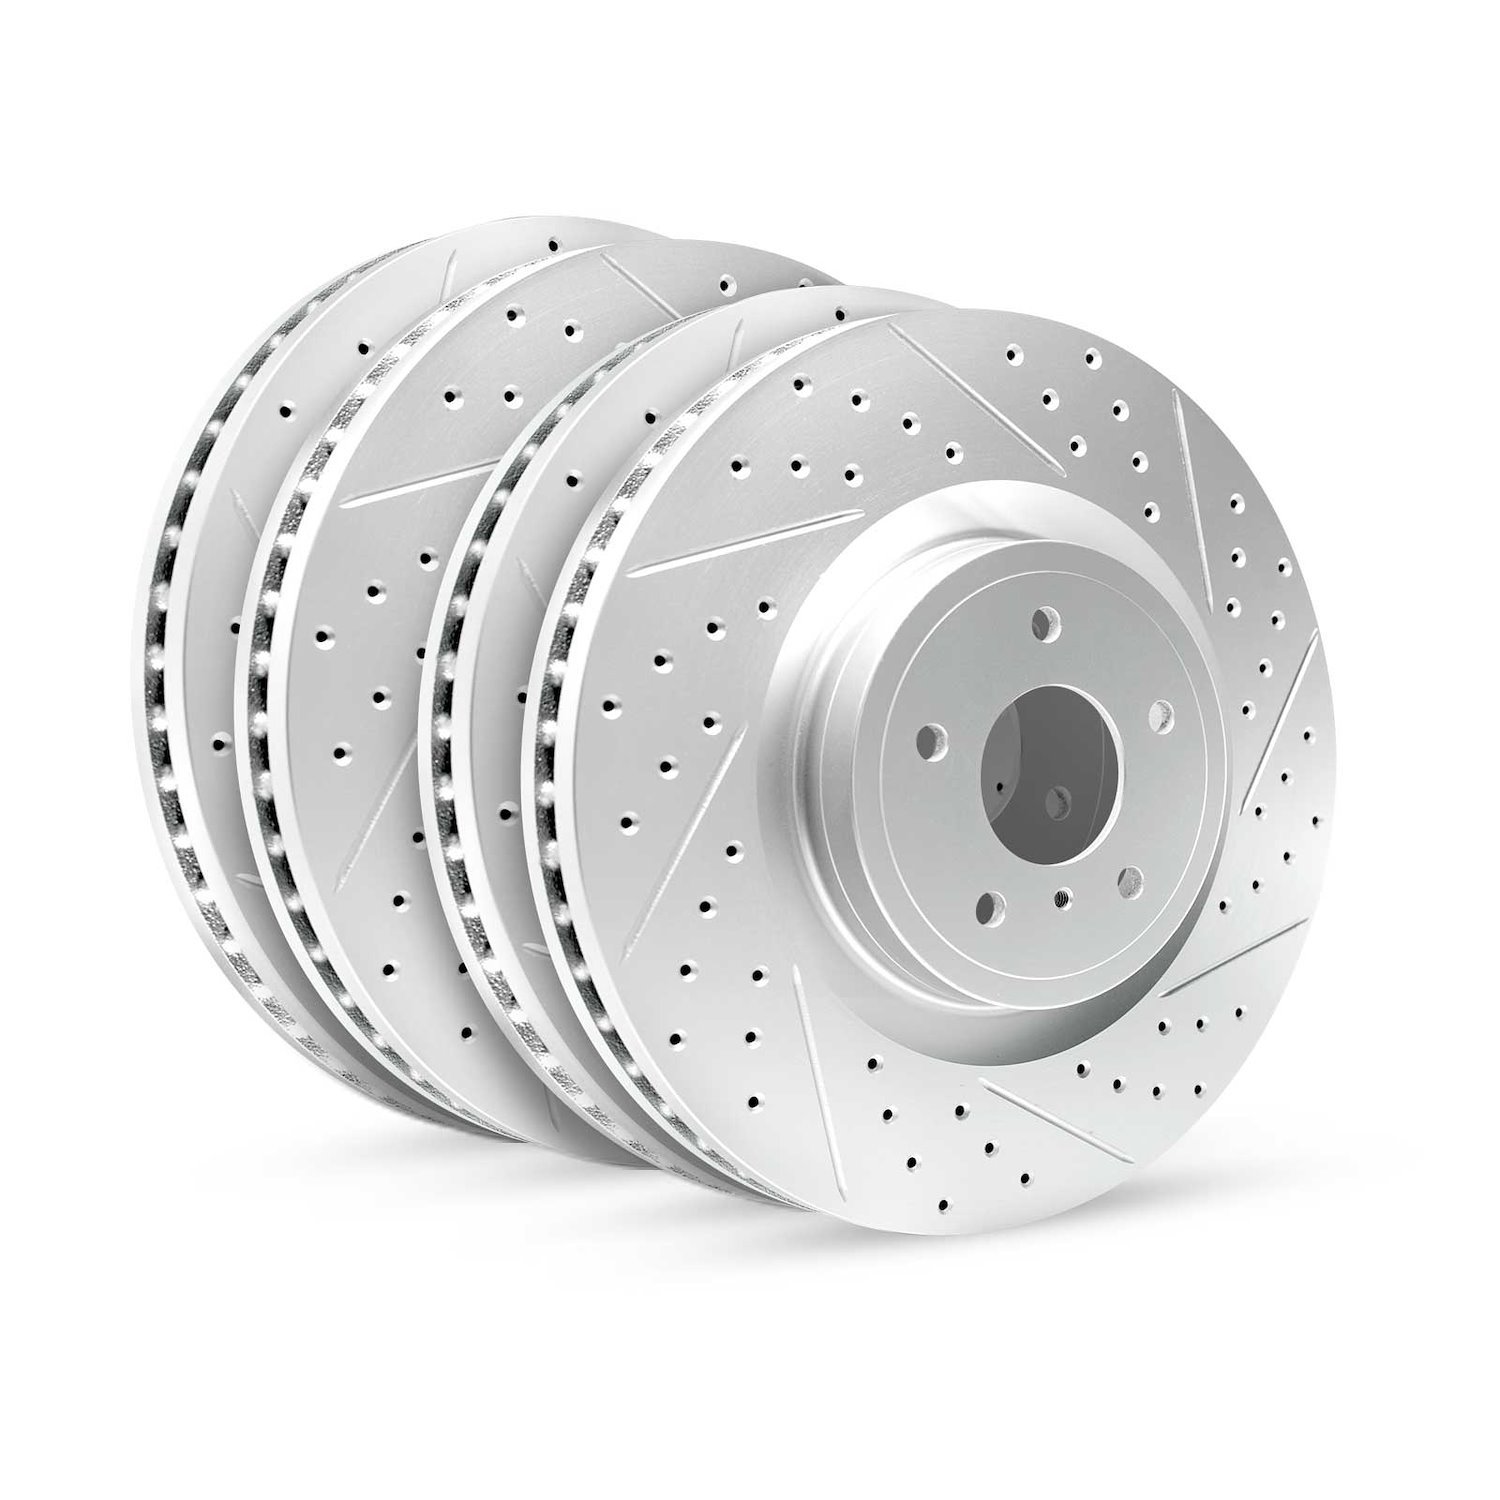 GEO-Carbon Drilled/Slotted Rotor/Drums, 1995-1996 Ford/Mazda,